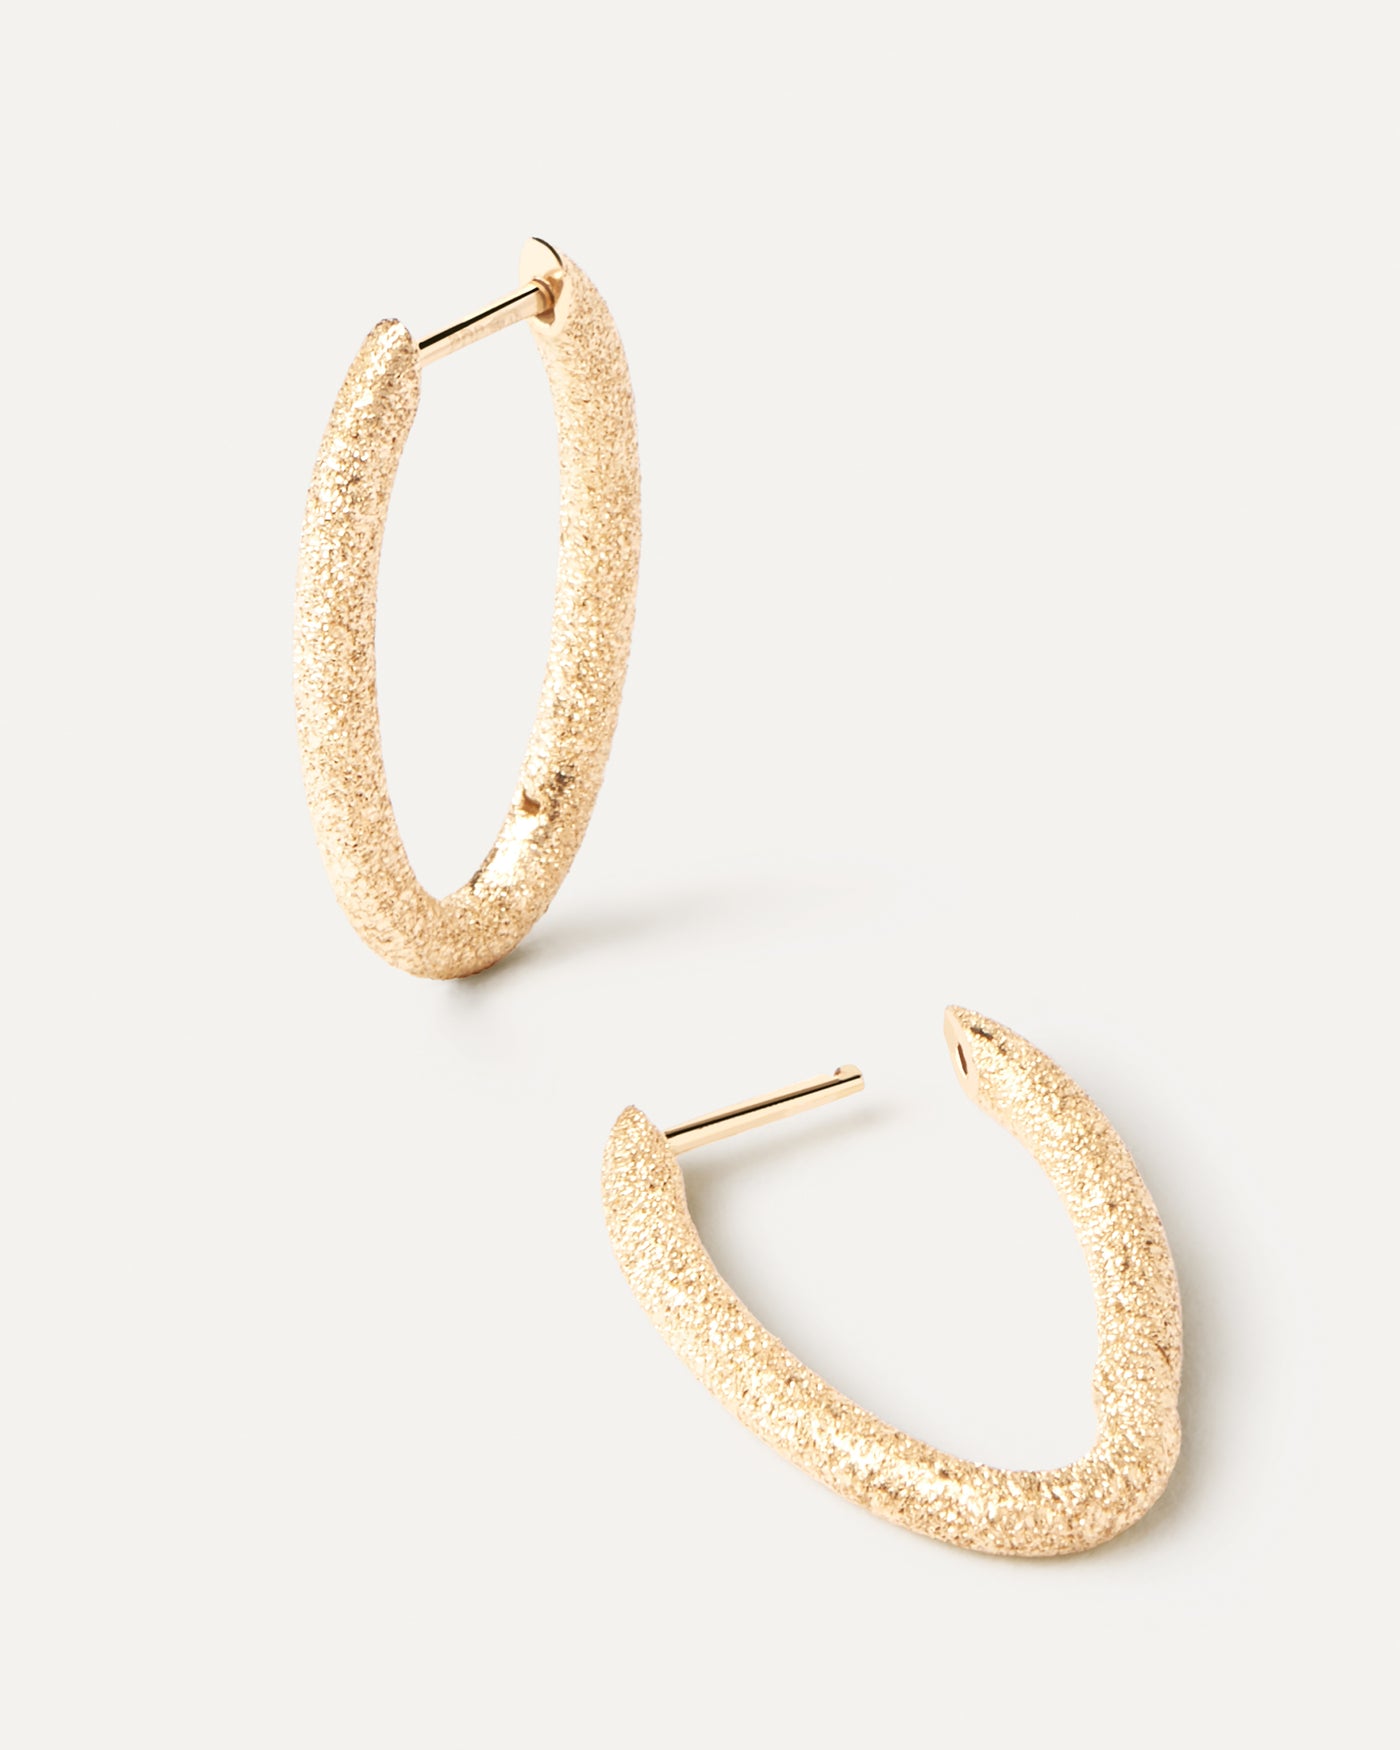 SOLID 14K Yellow Gold Hoop Earrings, New Shiny Flat Tube Design, Real  Handmade Gold Hoops, by TILO Jewelry - Etsy